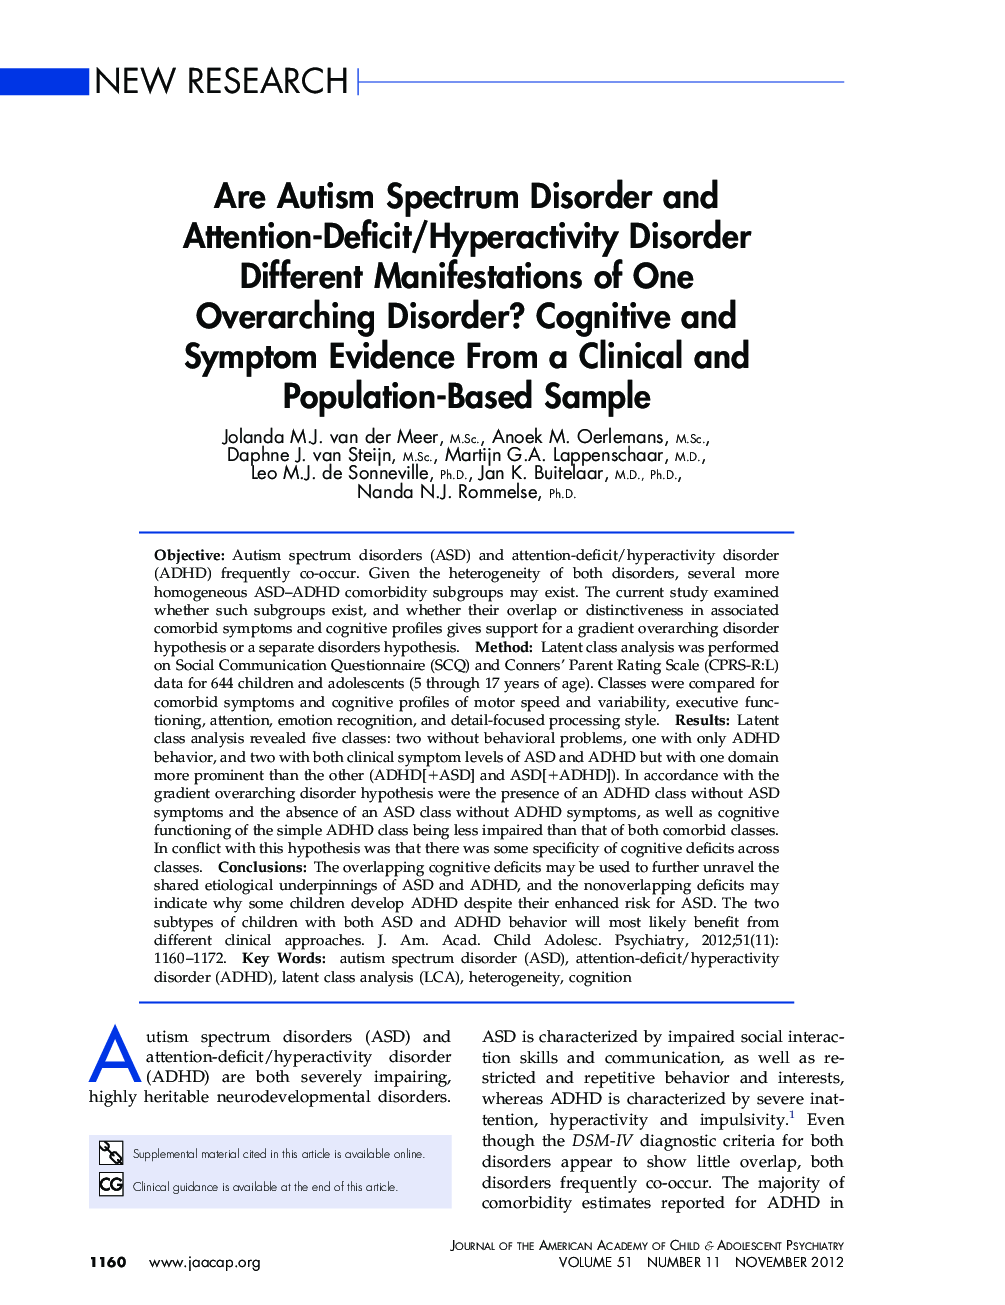 Are Autism Spectrum Disorder and Attention-Deficit/Hyperactivity Disorder Different Manifestations of One Overarching Disorder? Cognitive and Symptom Evidence From a Clinical and Population-Based Sample